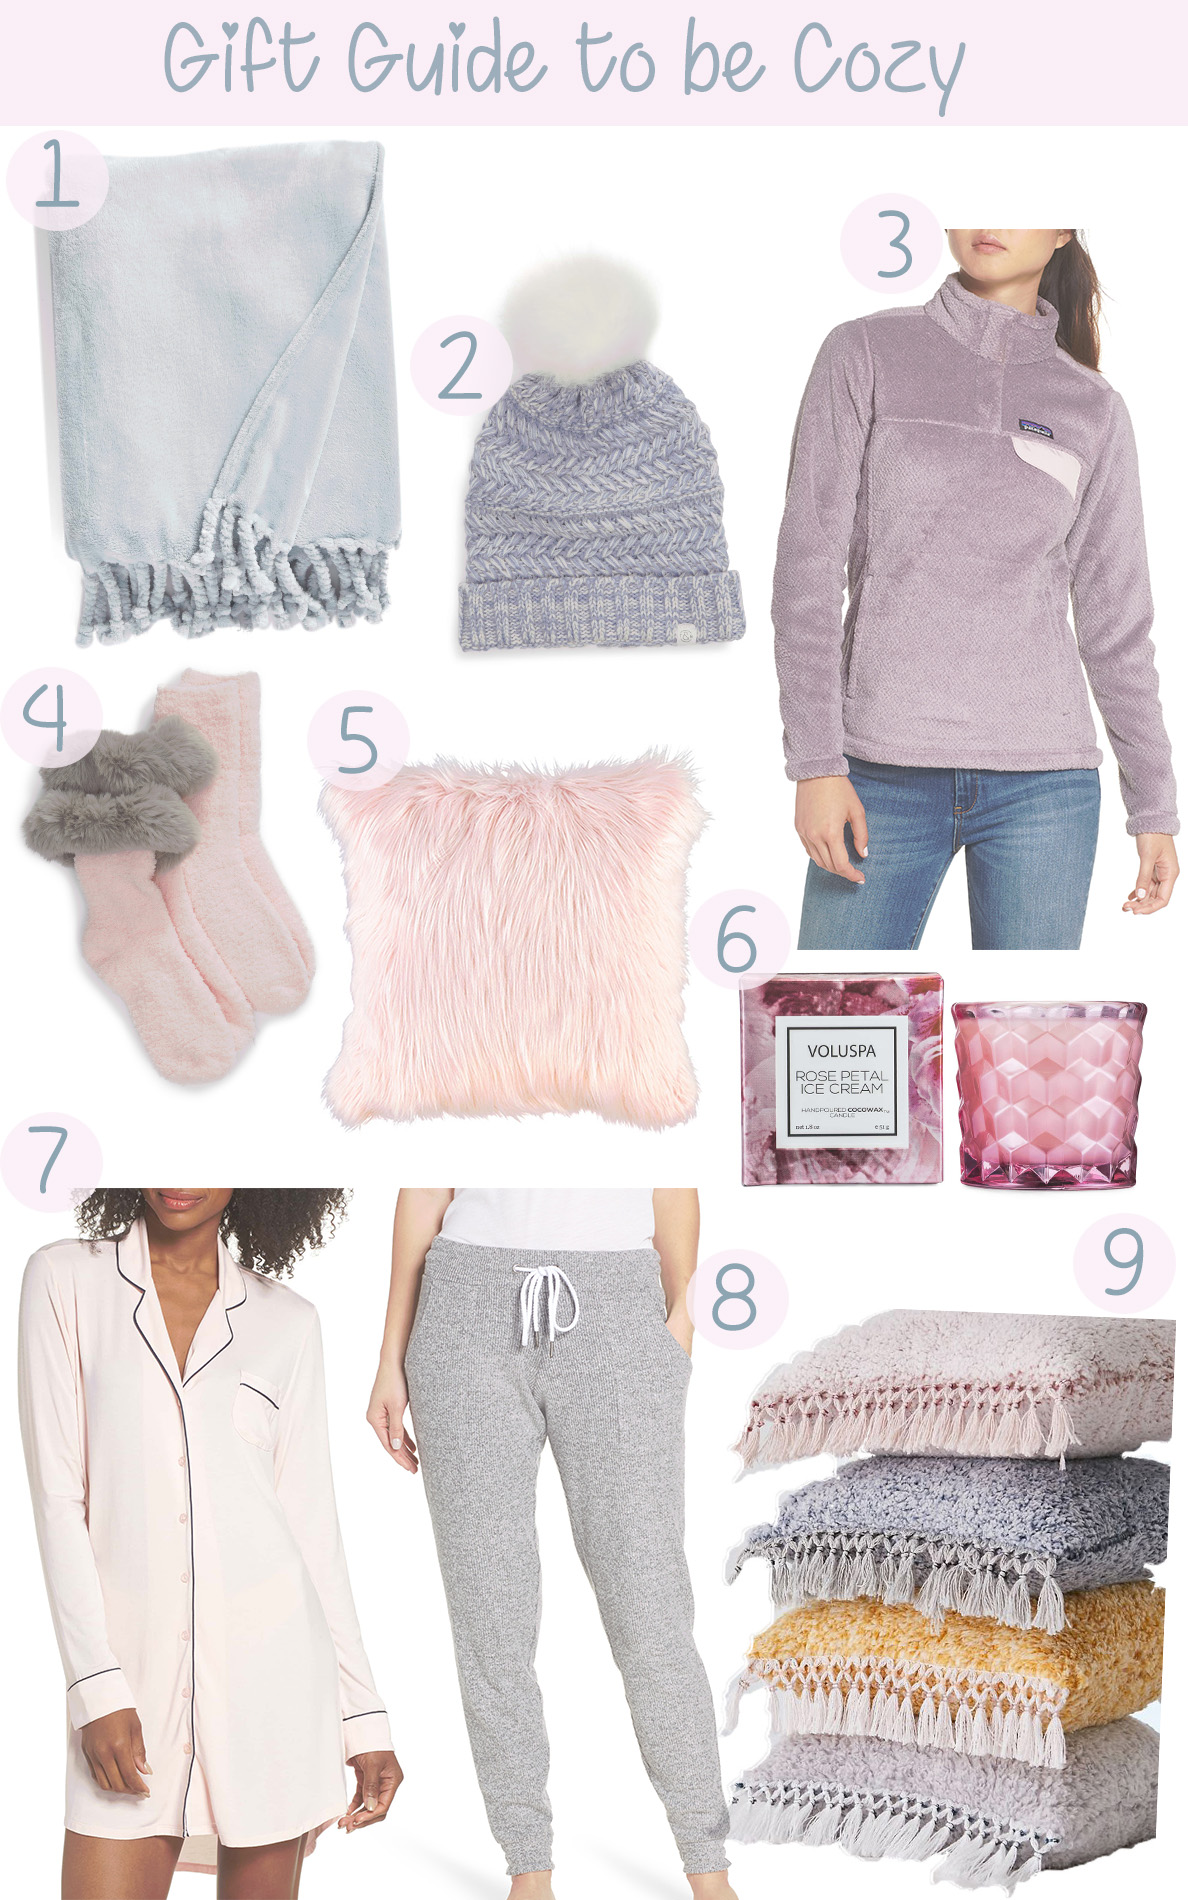 2018 Gift Guide to be Cozy